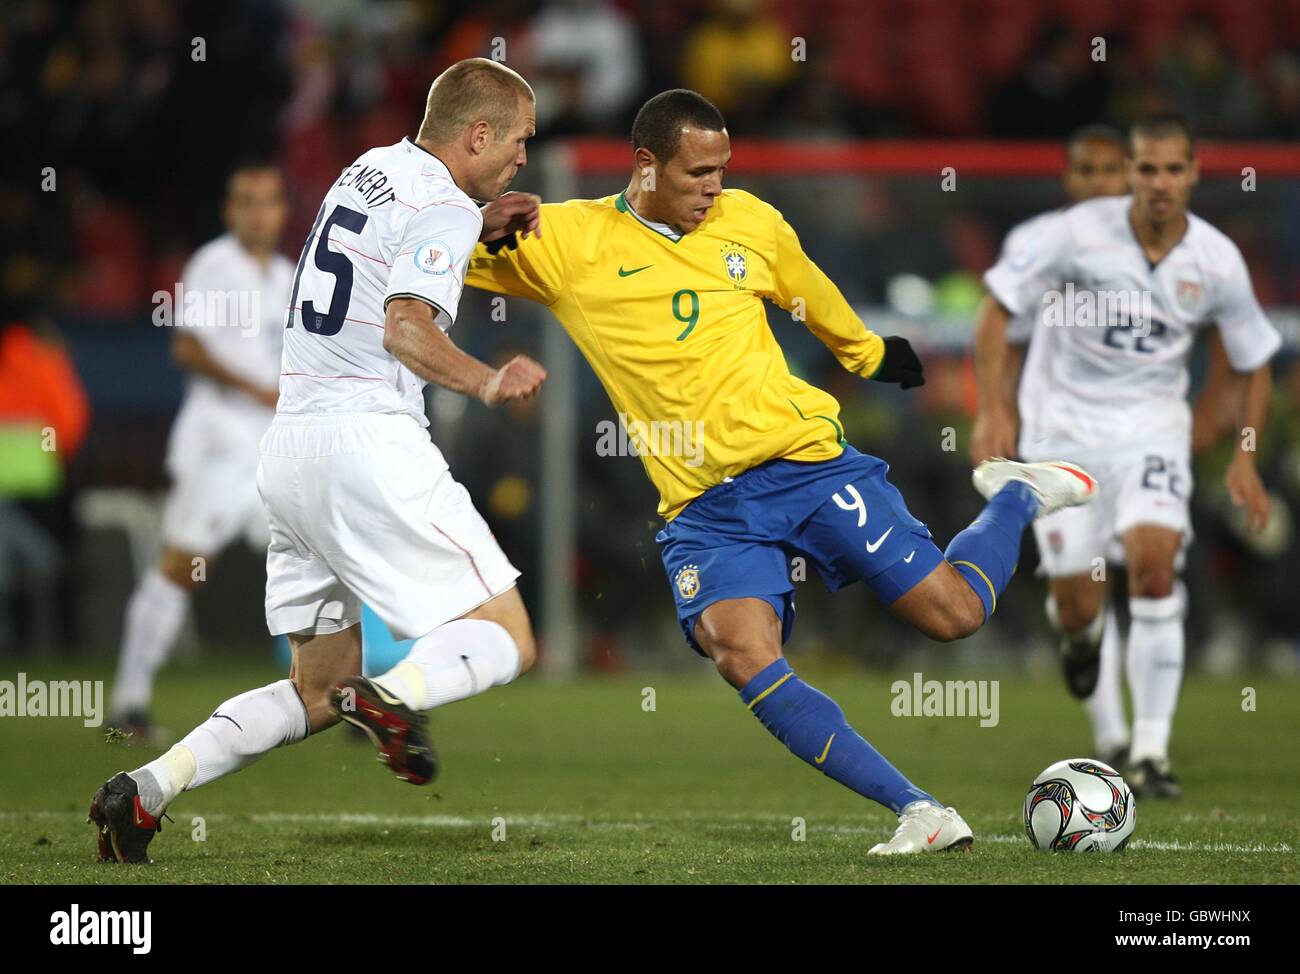 Soccer - 2009 FIFA Confederations Cup - Final - USA v Brazil - Ellis Park. Brazil's Luis Fabiano (right) scores their first goal past USA's Jay DeMerit (left) Stock Photo